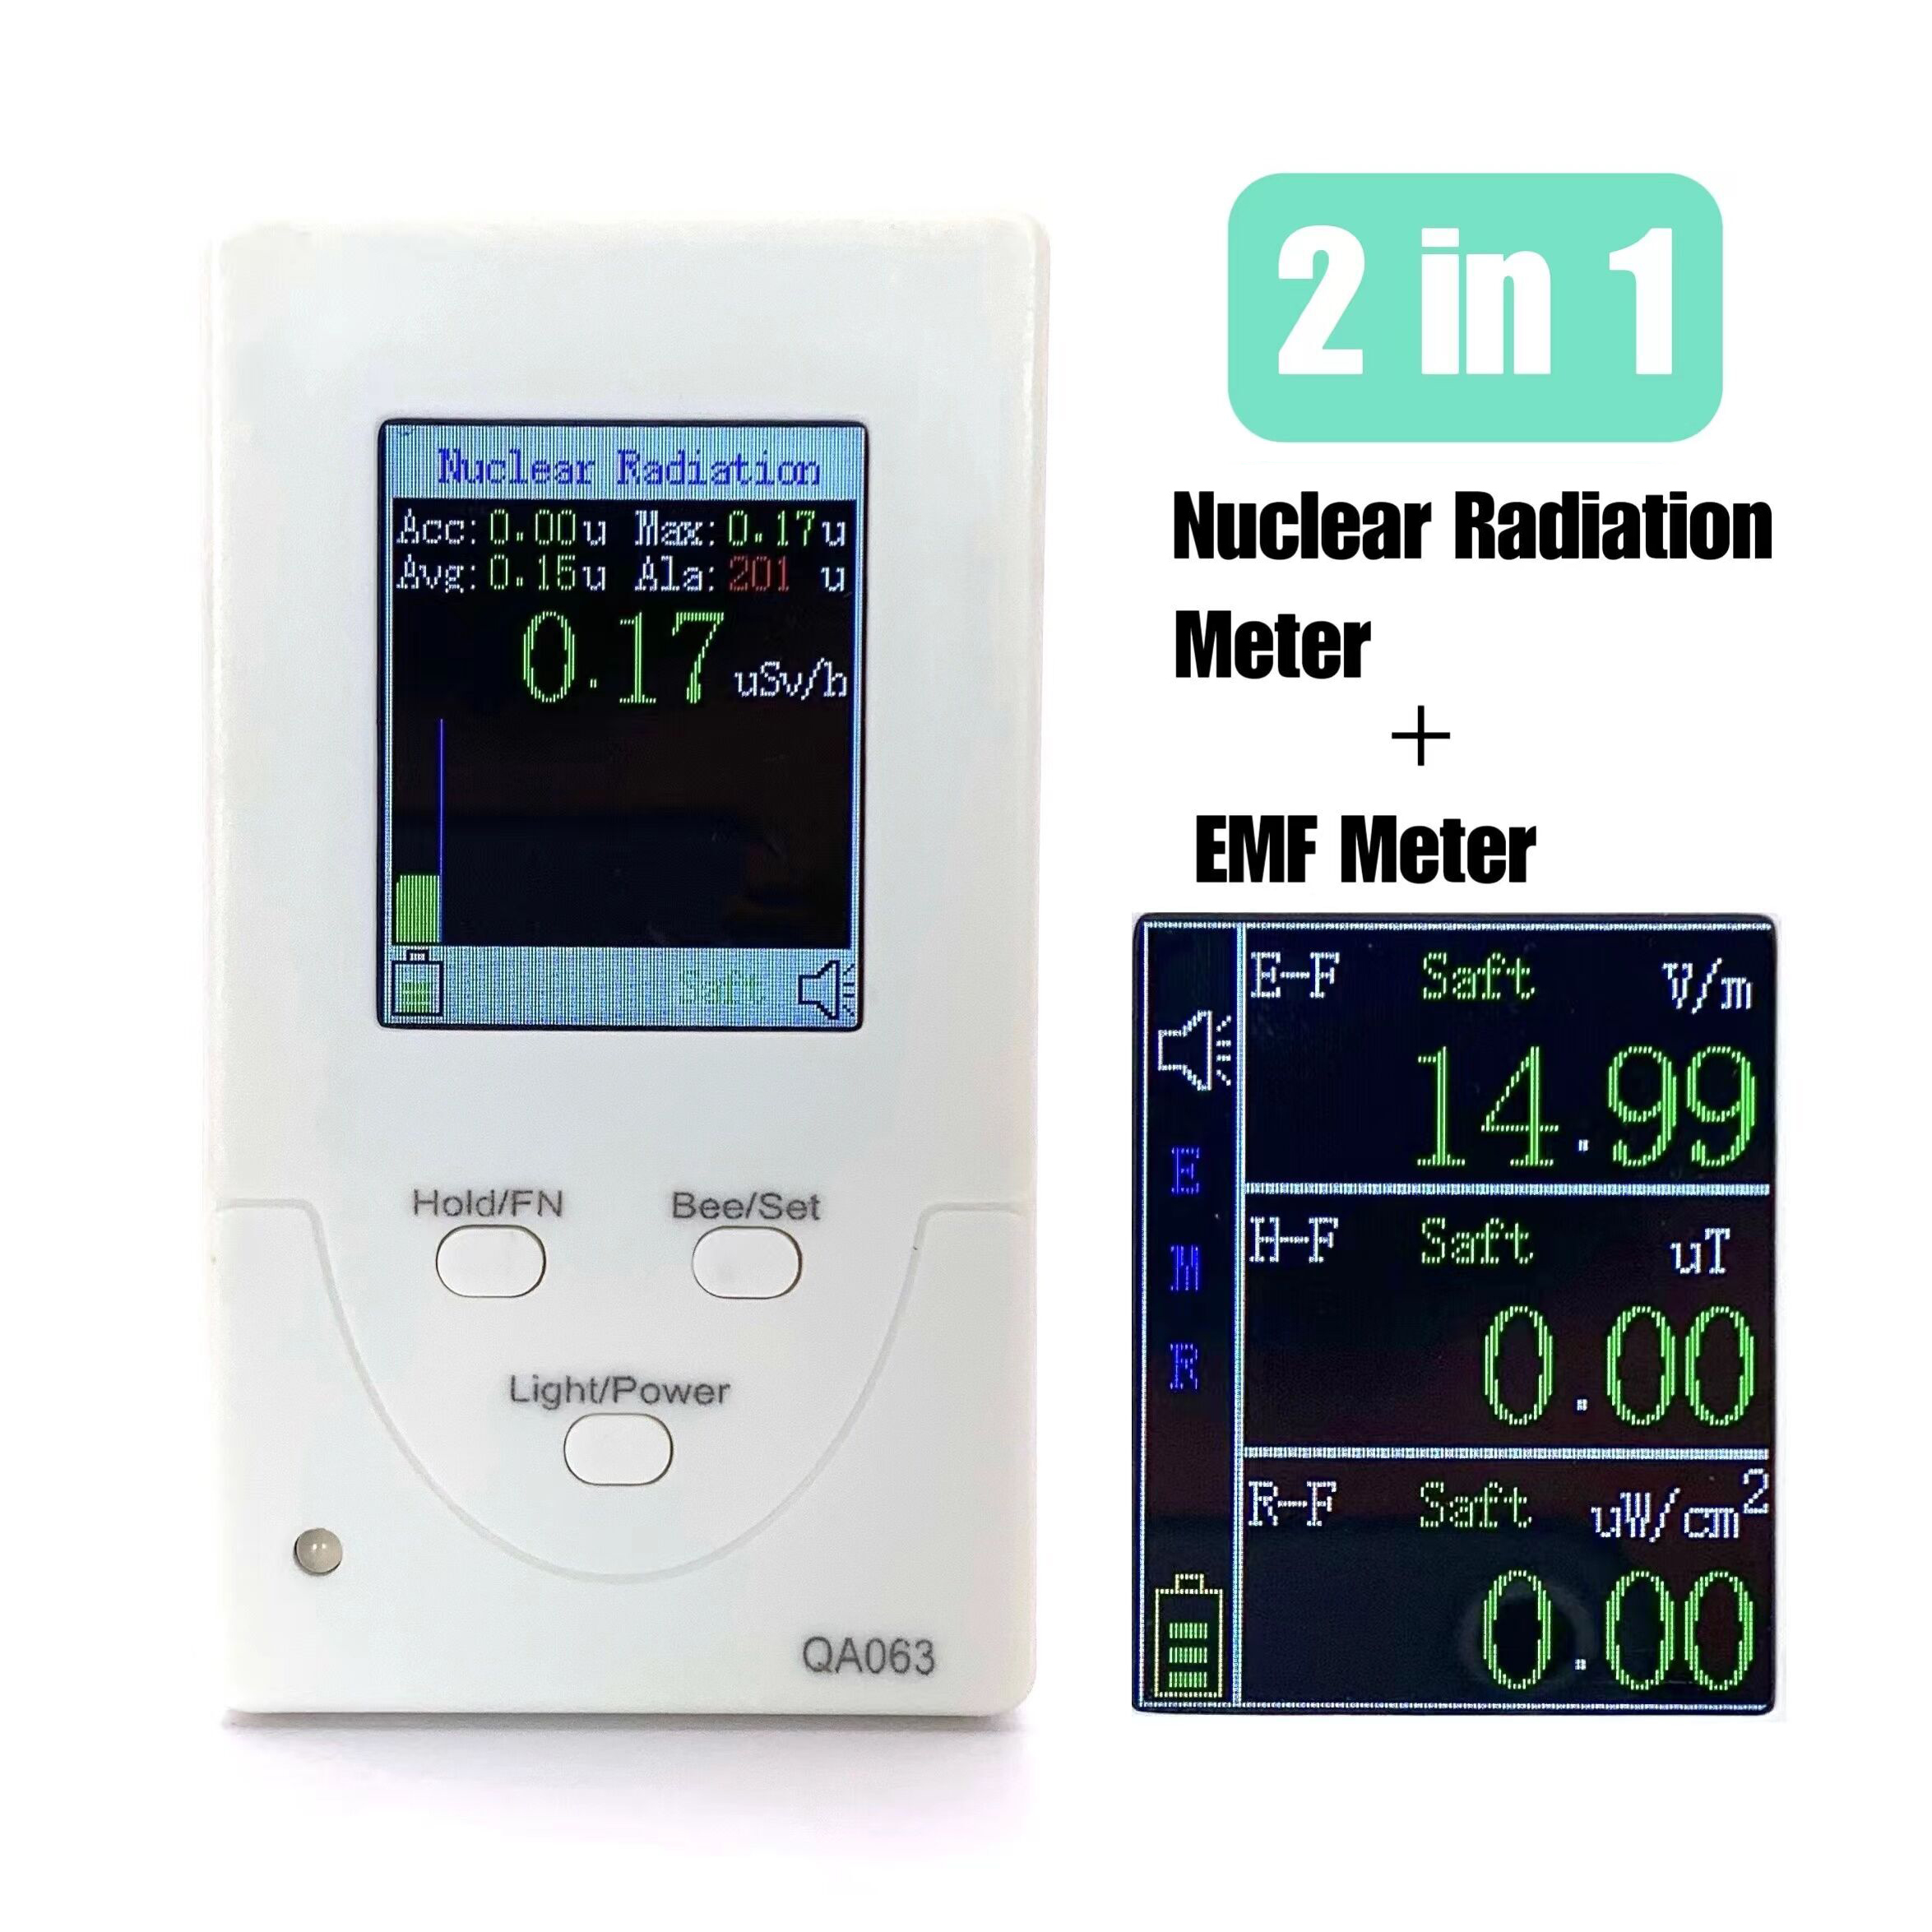 Find Nuclear Radiation Tester Electromagnetic Radiometer Radiation Dosimeter Geiger Counter Personals Dosimeter X ray Beta Gamma Iodine 131 Tester for Sale on Gipsybee.com with cryptocurrencies